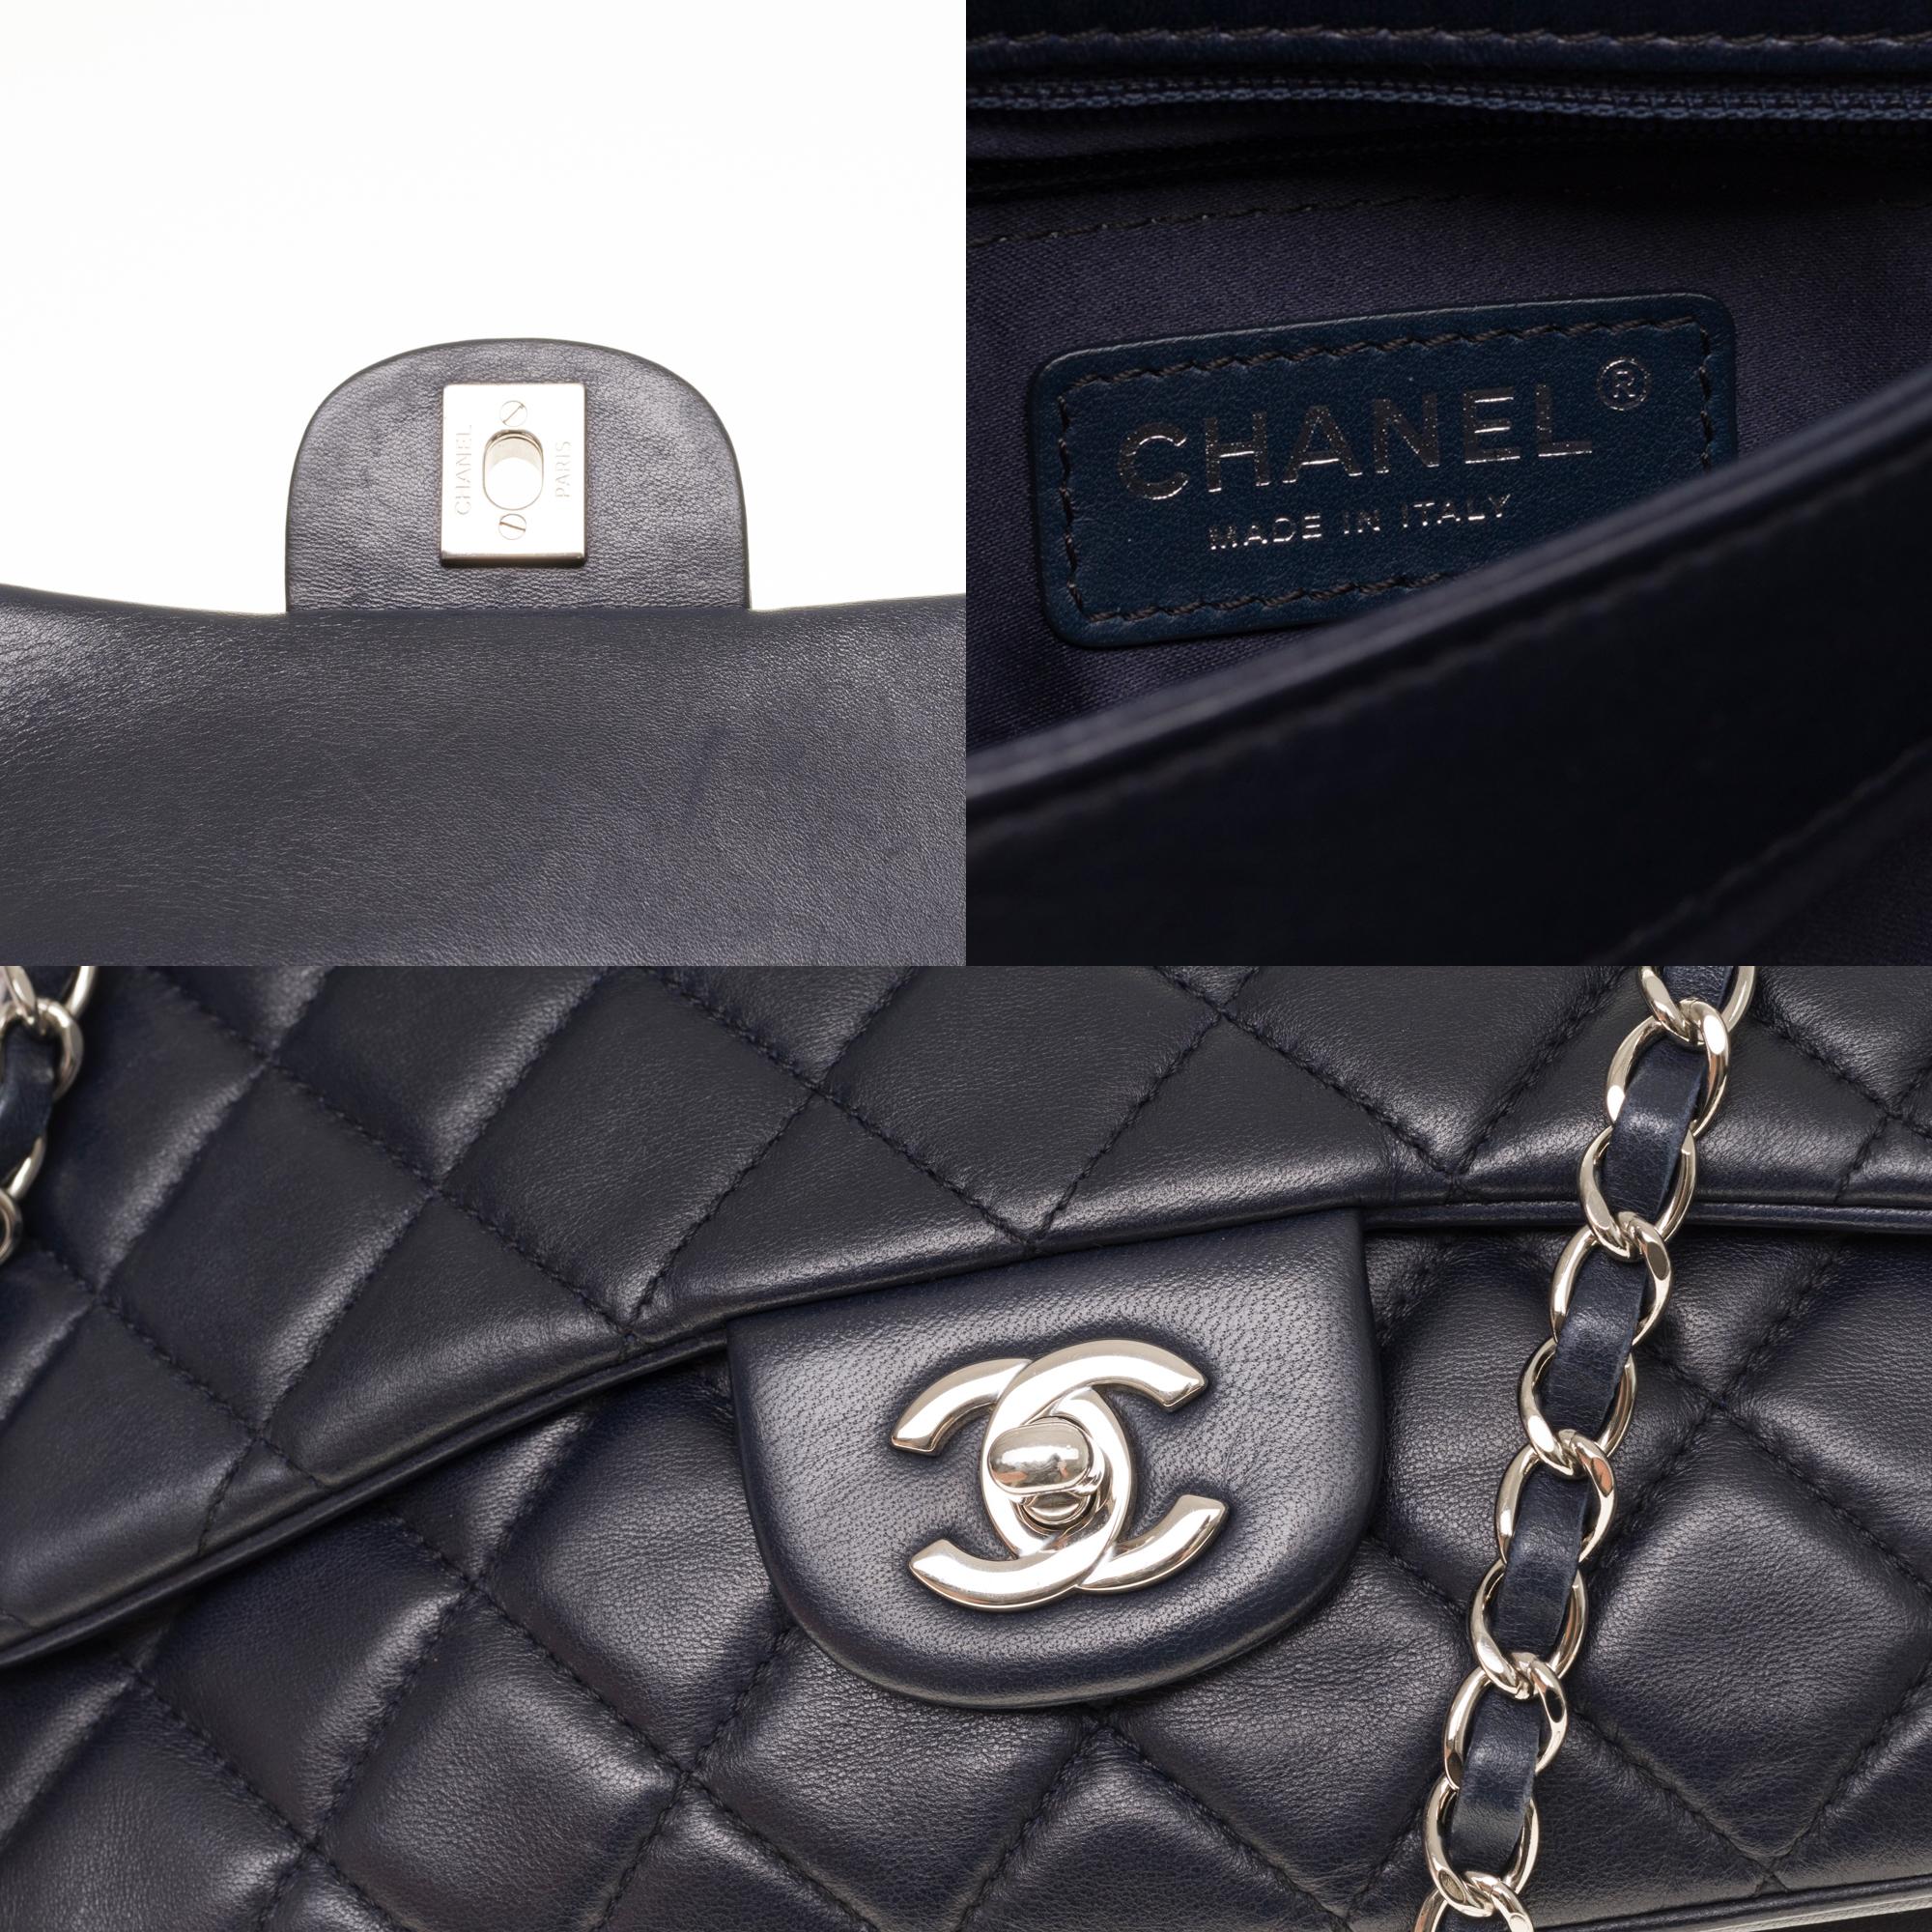 Women's Chanel Classic shoulder bag in Navy blue quilted lambskin leather, SHW